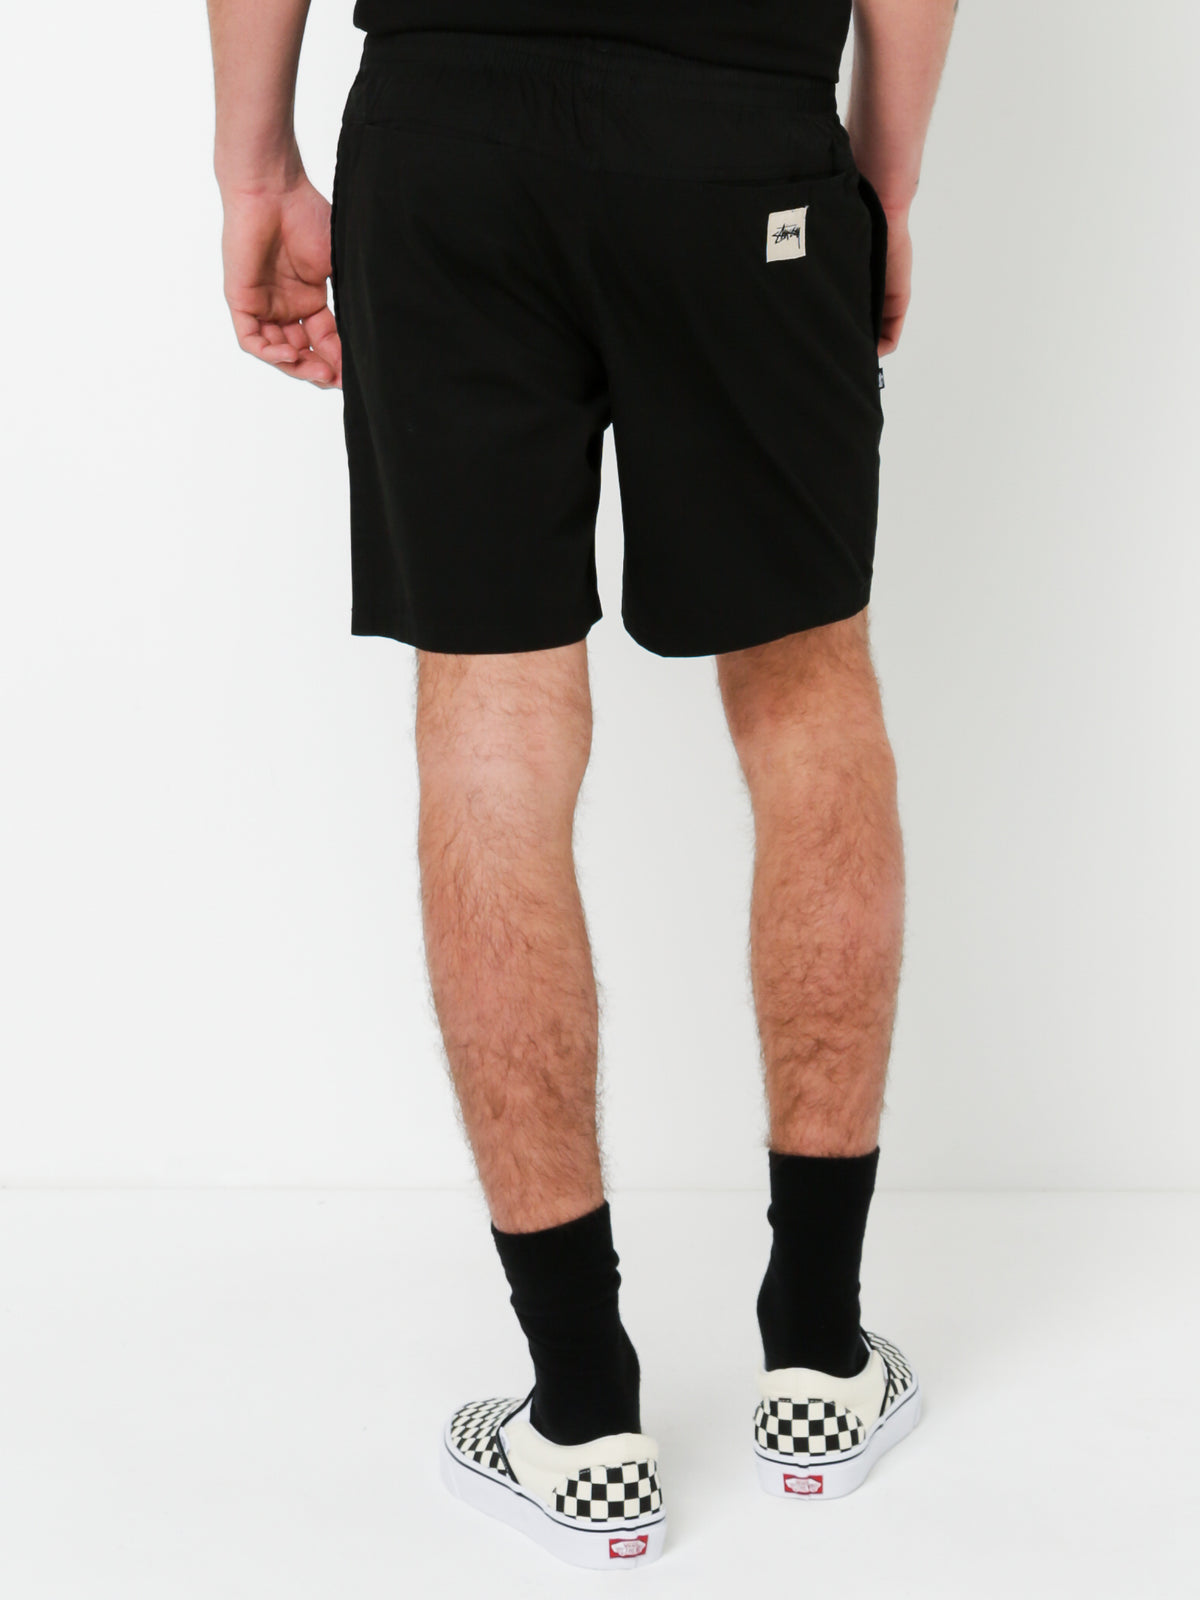 Basic Cities Shorts in Black